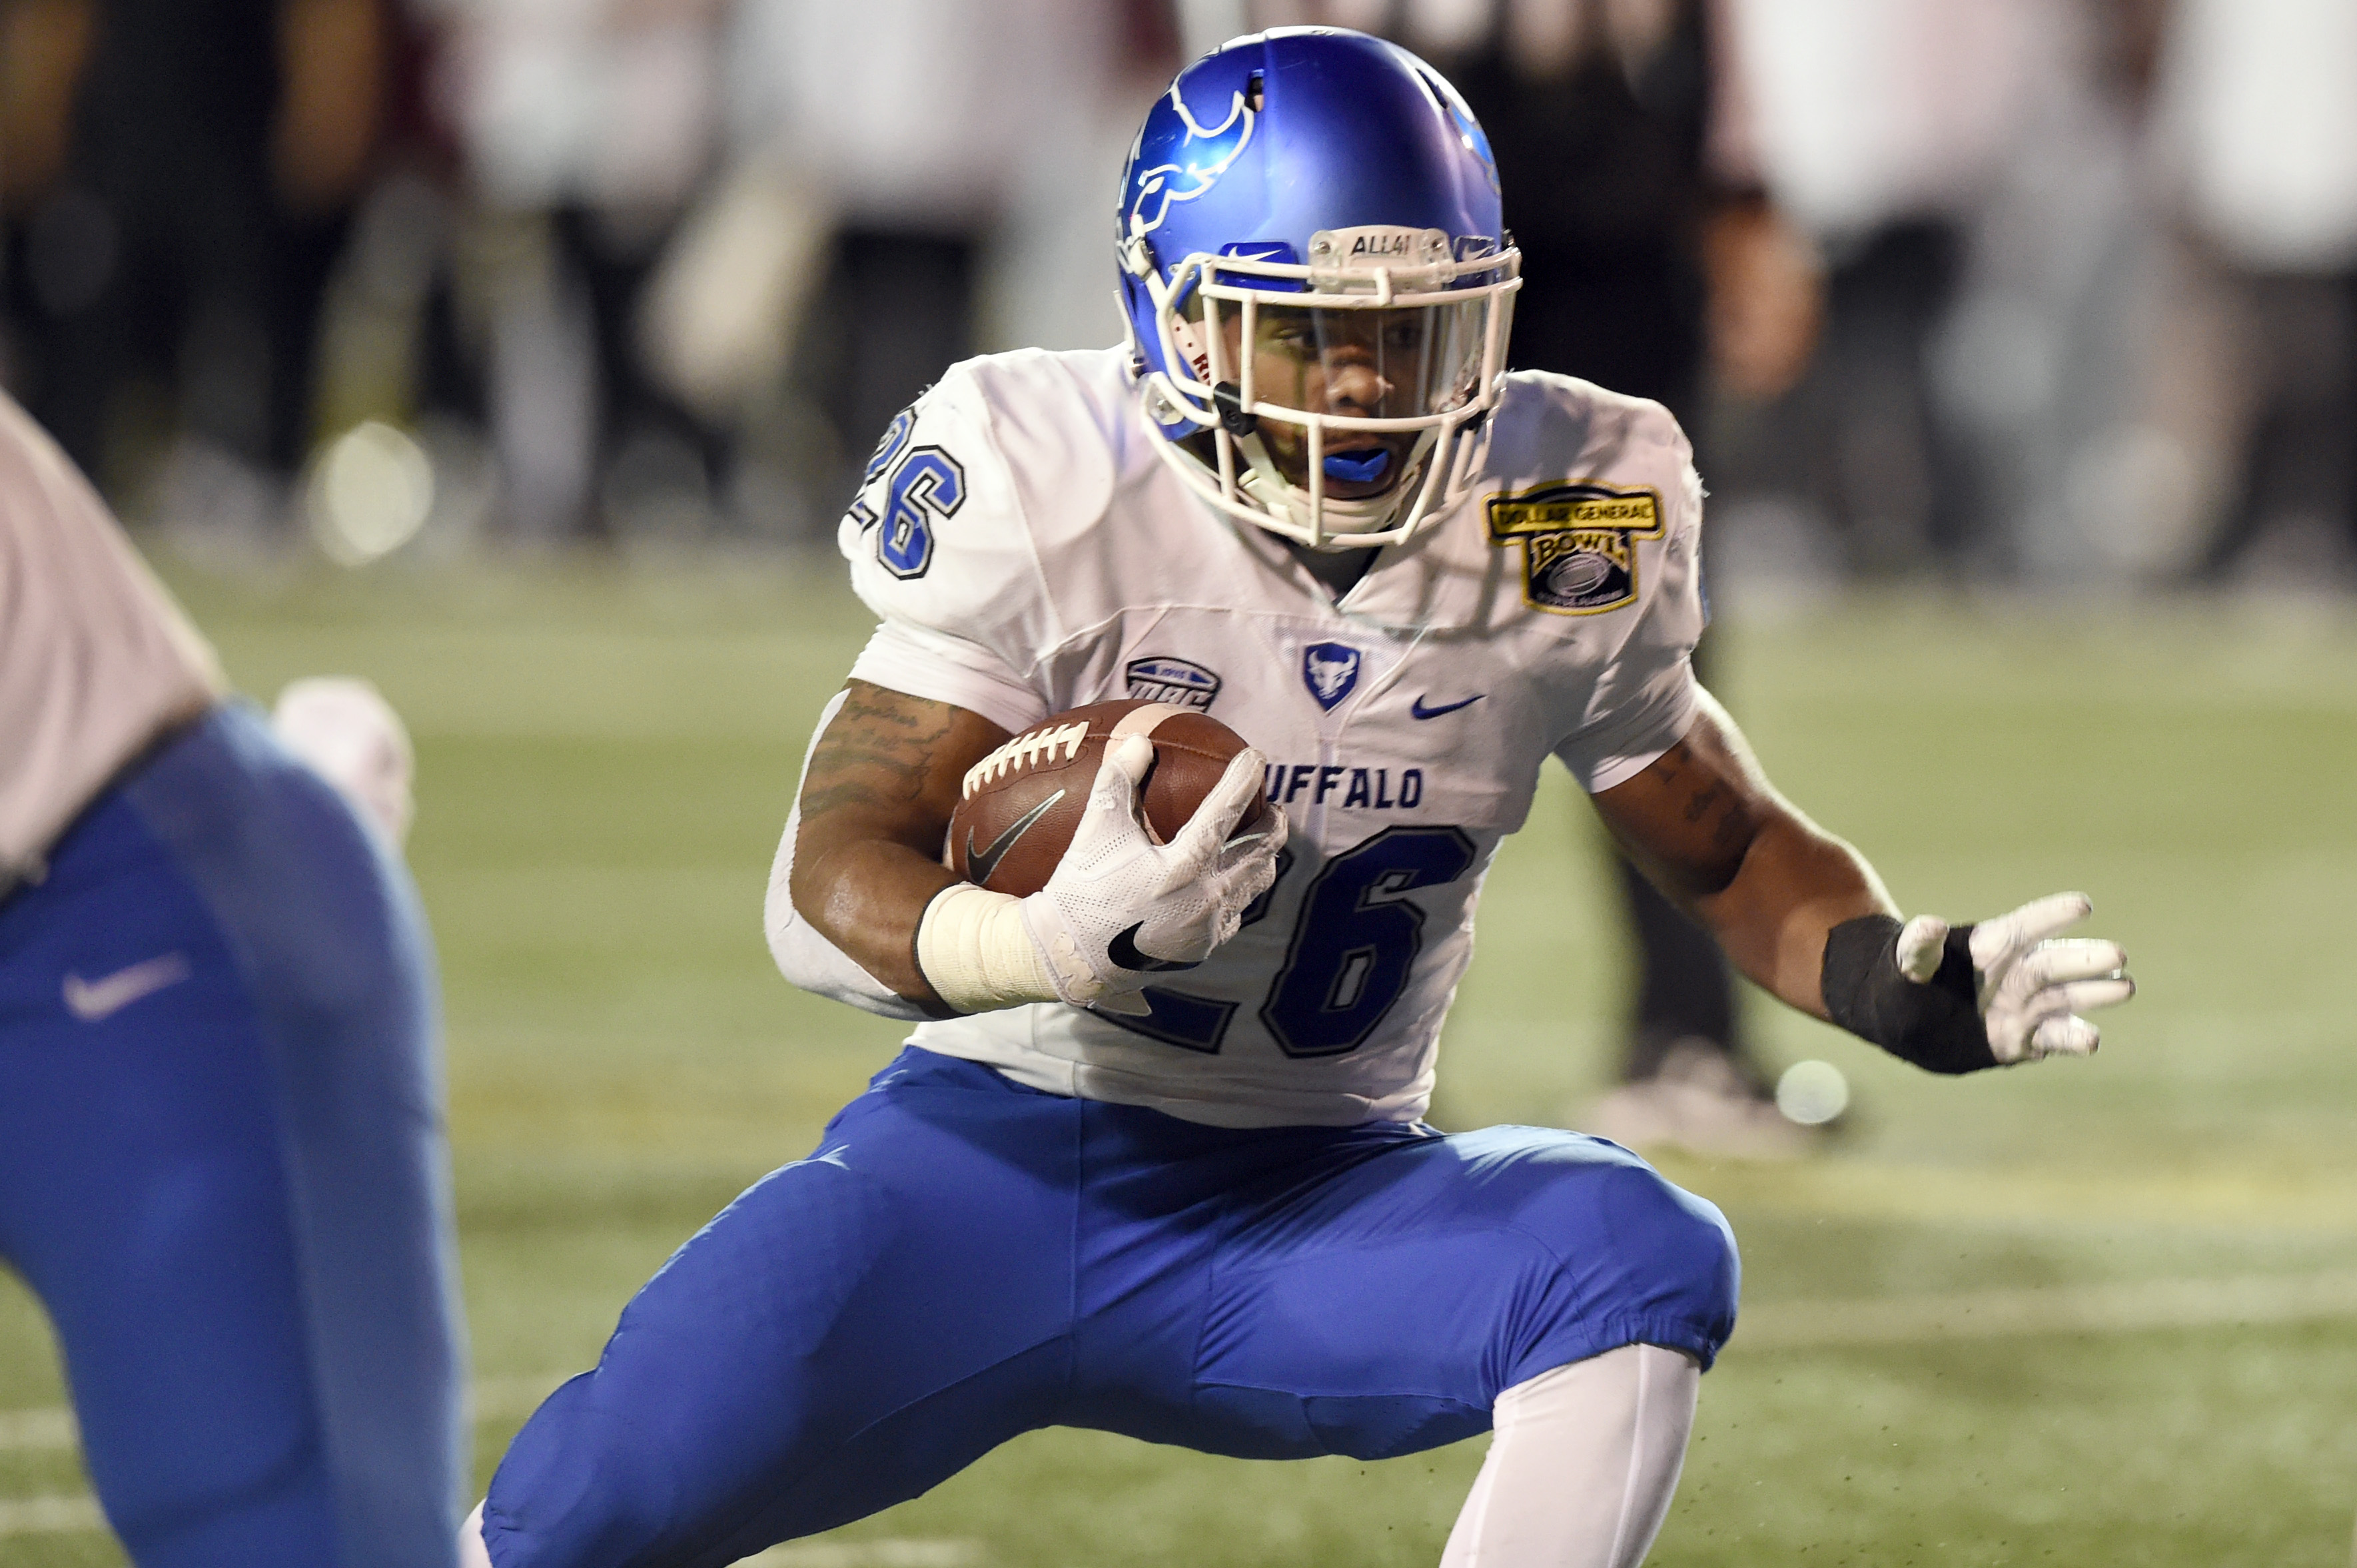 Buffalo Bulls RB Jaret Patterson ties NCAA record for most rushing TDs